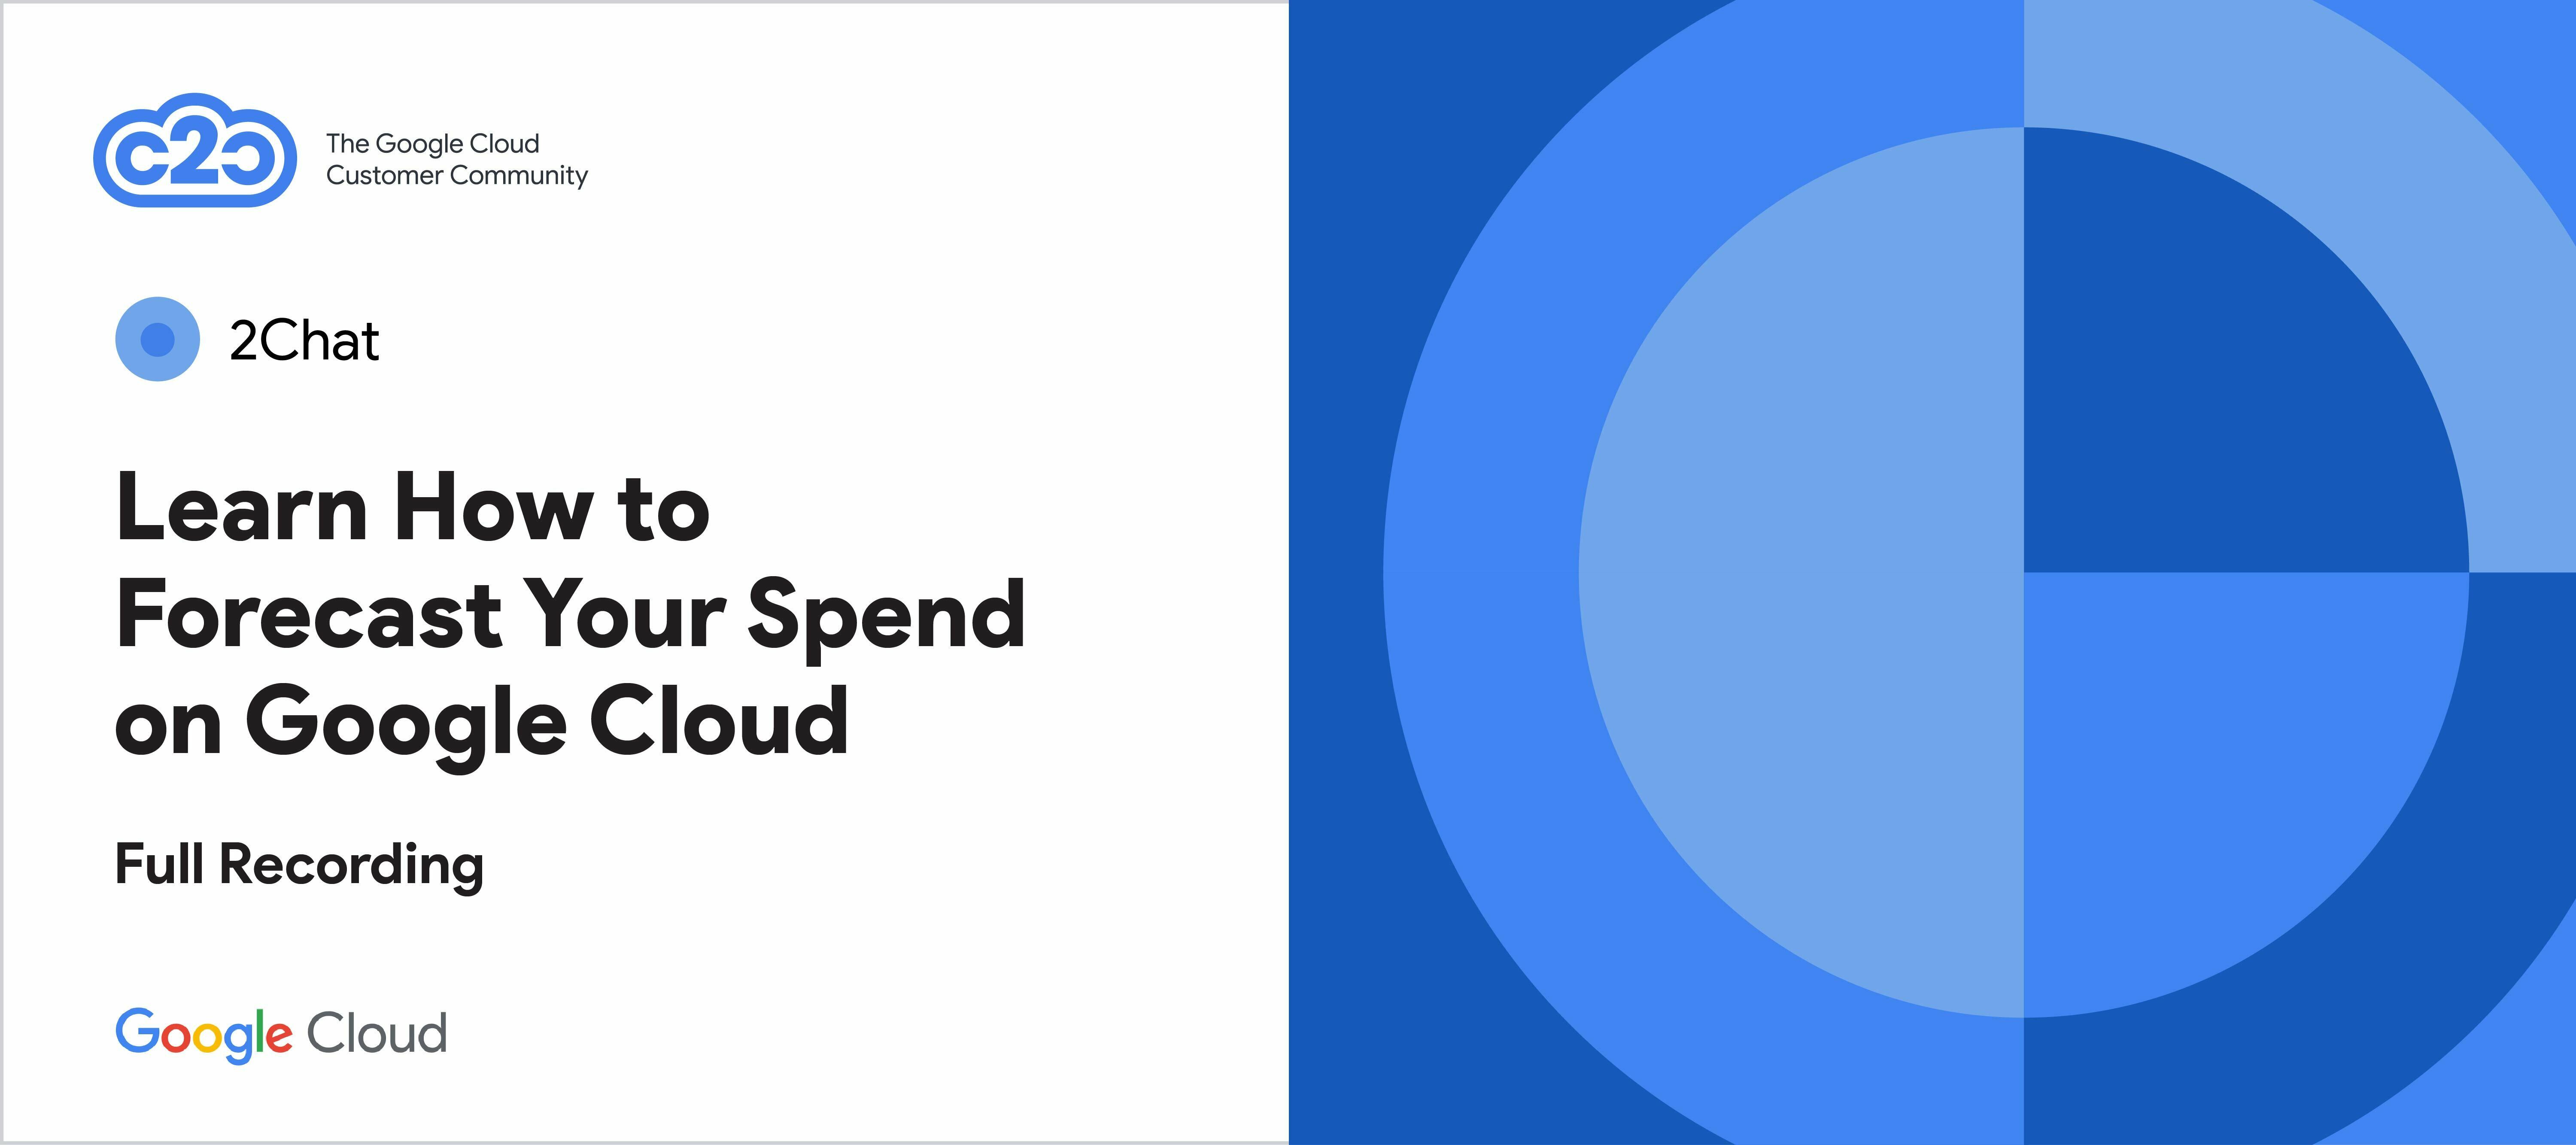 Learn How to Forecast Your Spend on Google Cloud (full recording)